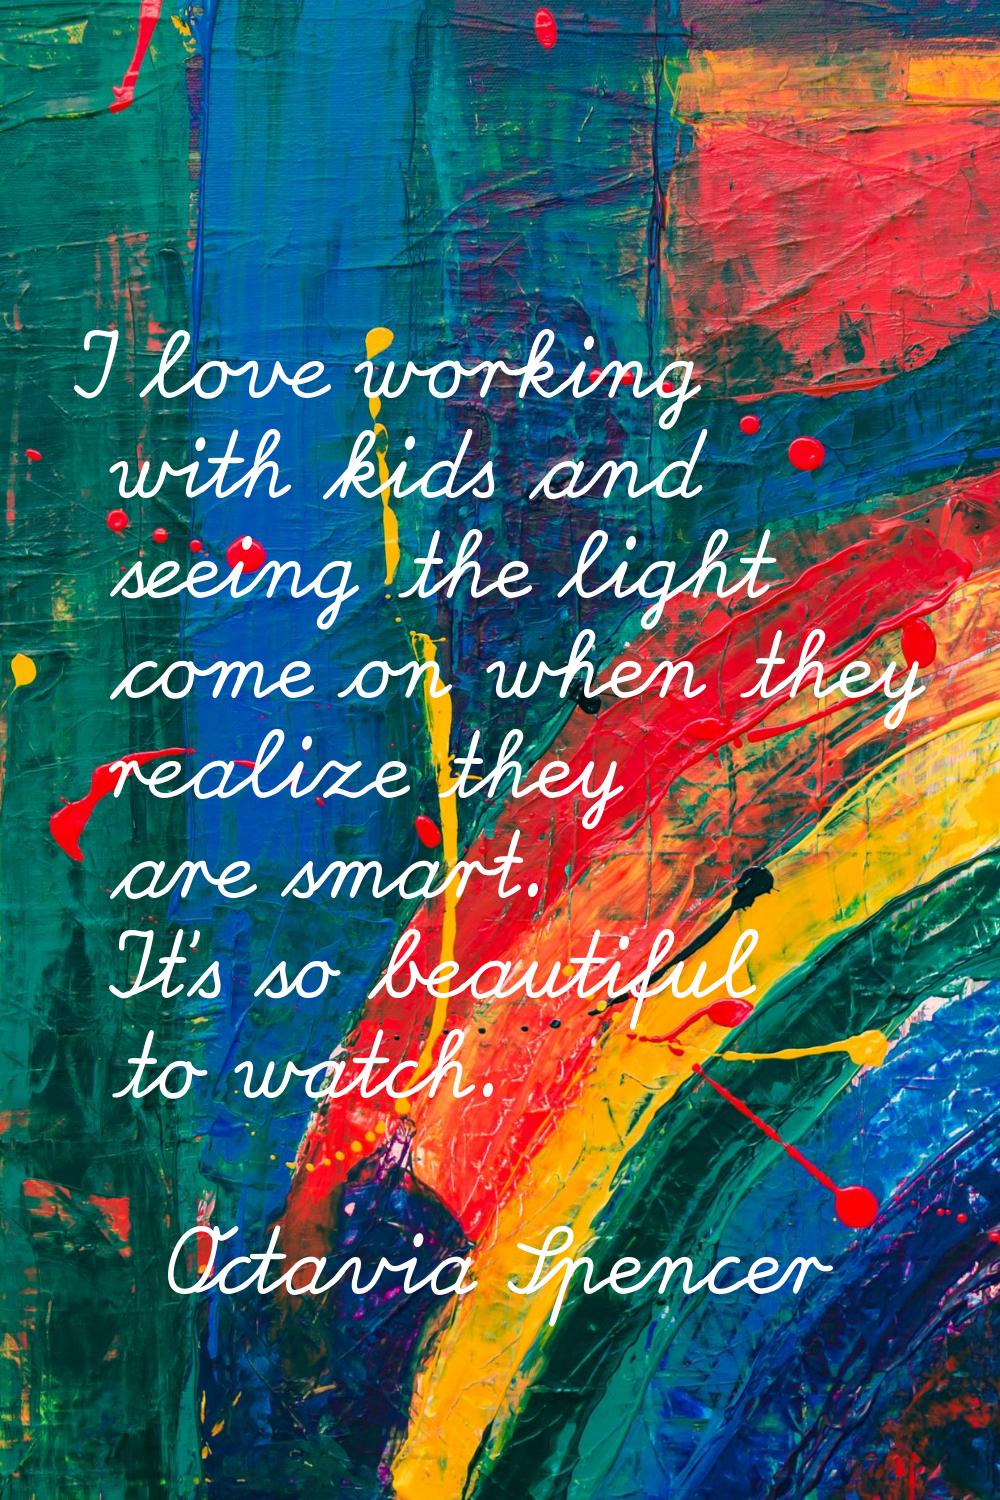 I love working with kids and seeing the light come on when they realize they are smart. It's so bea